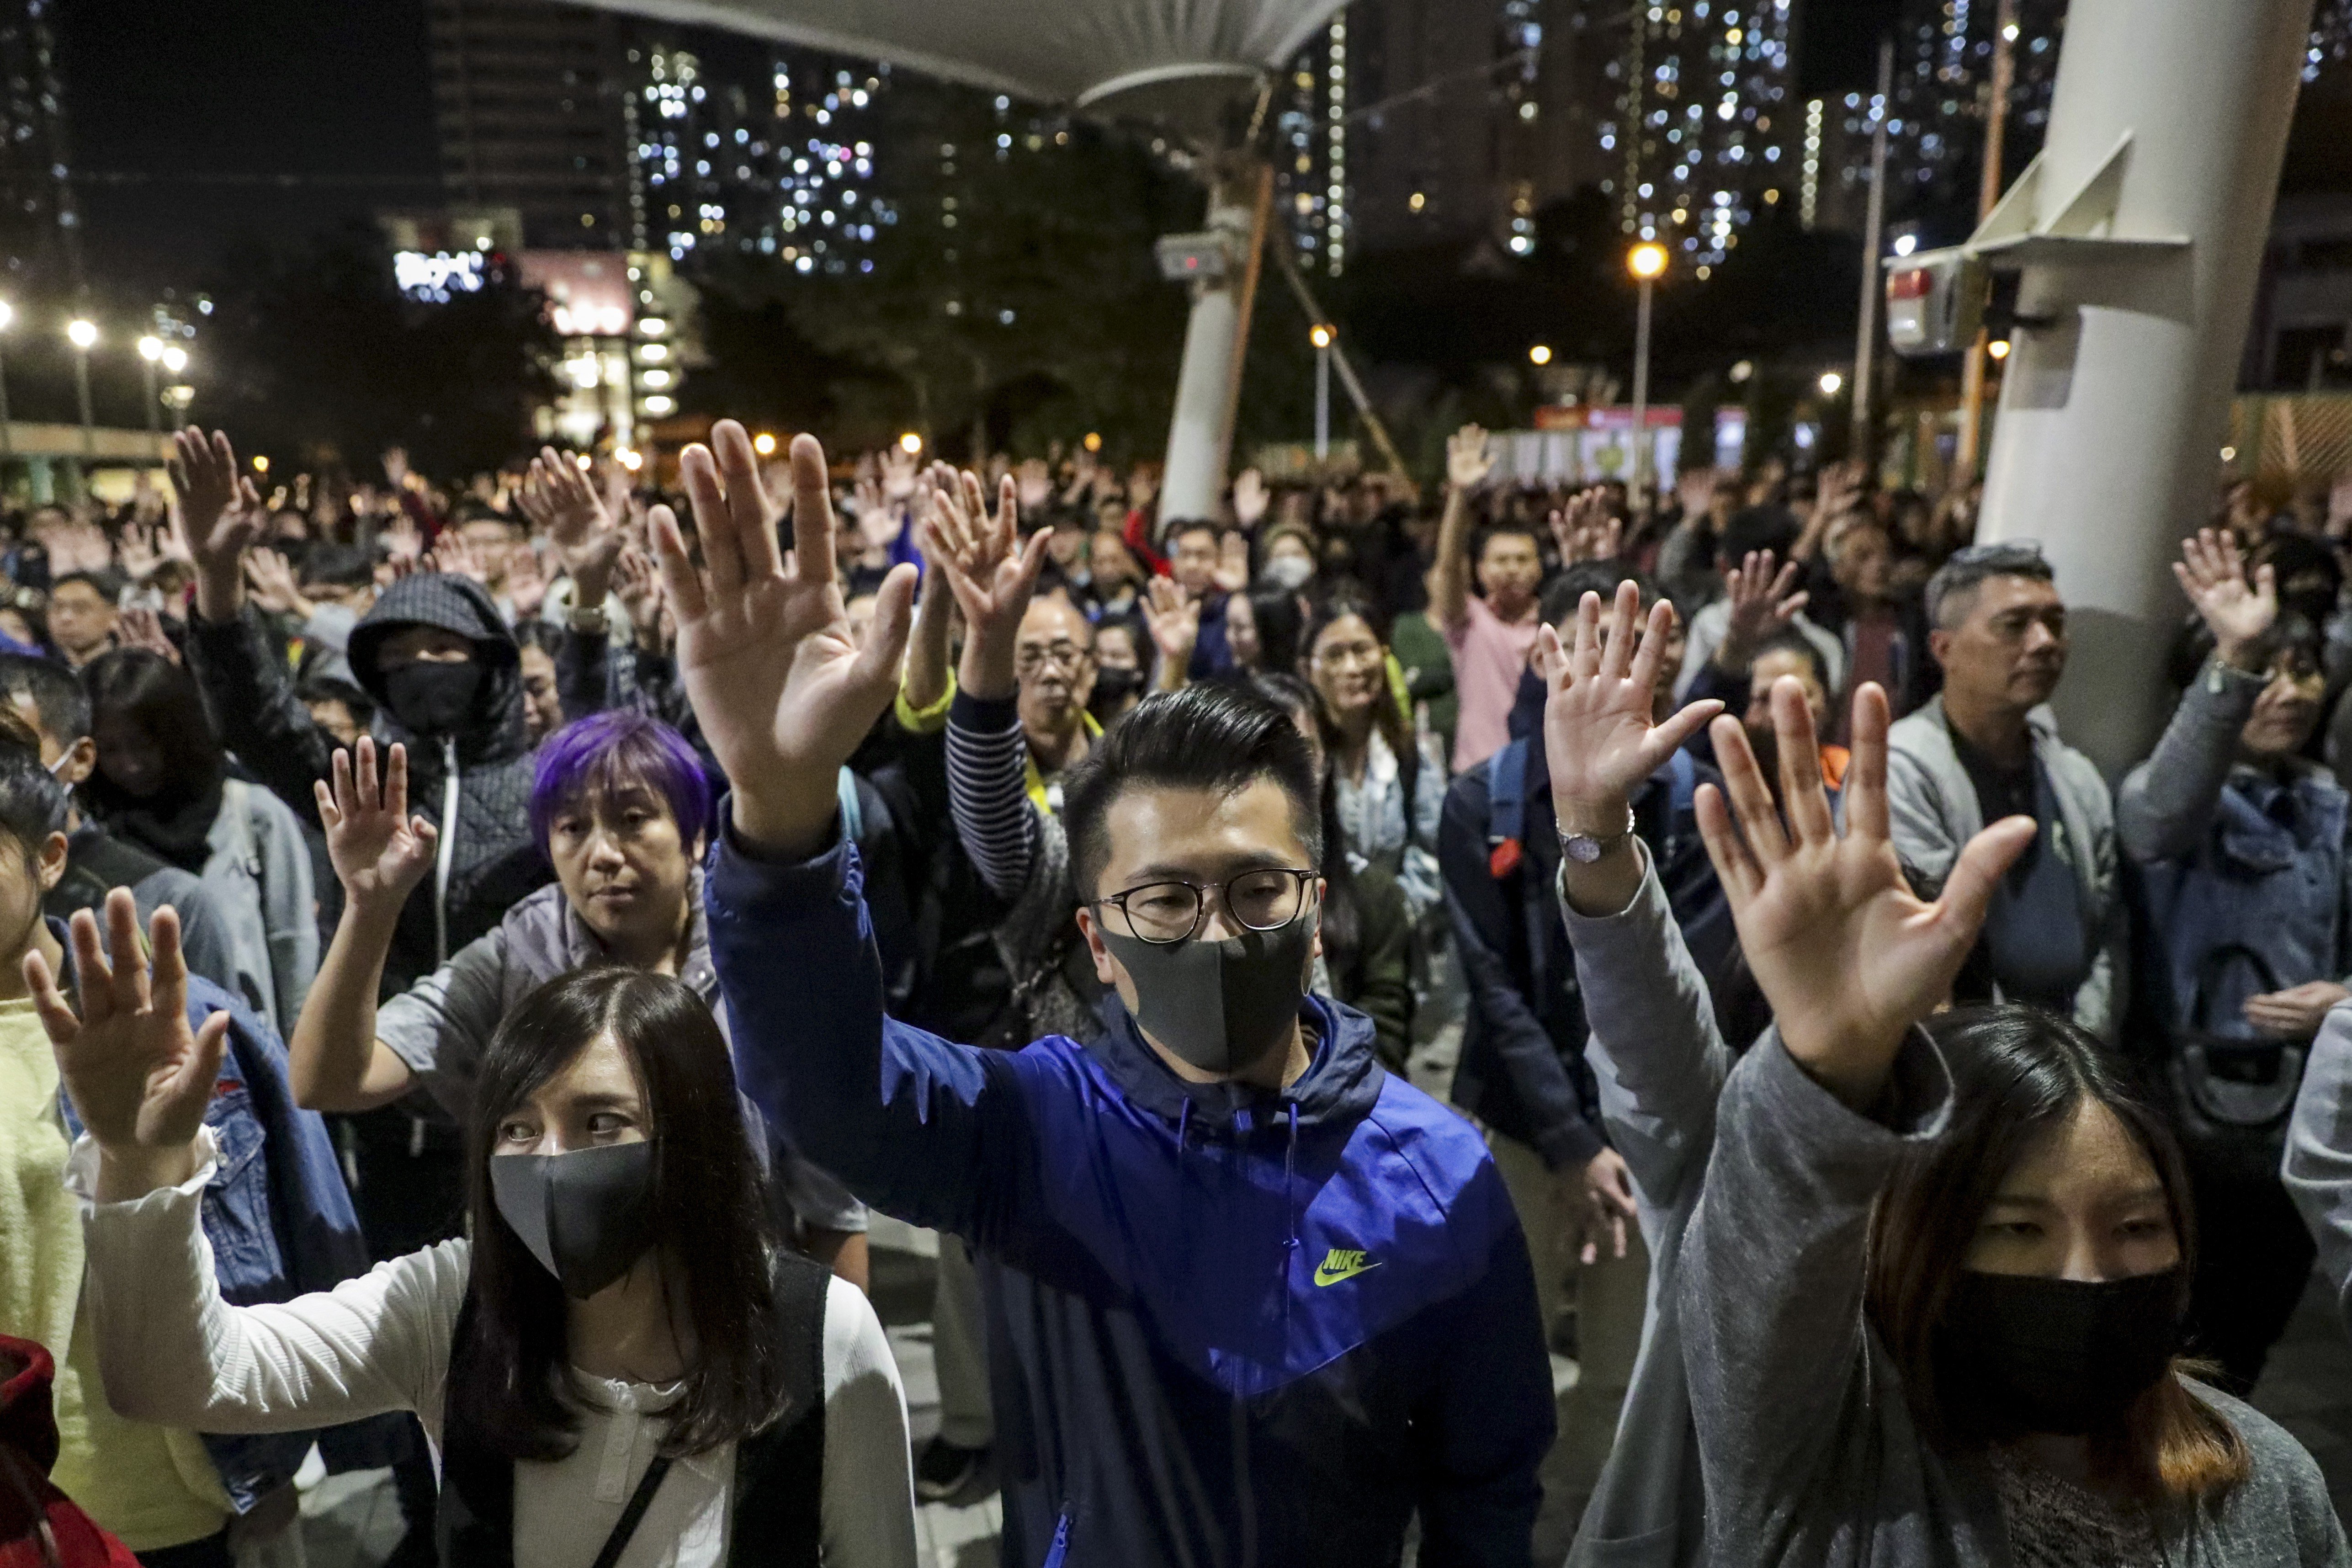 Democracy supporters raise their hands in support of the “five demands” of the protest movement at Wong Tai Sin Plaza on November 30. Photo: Edmond So